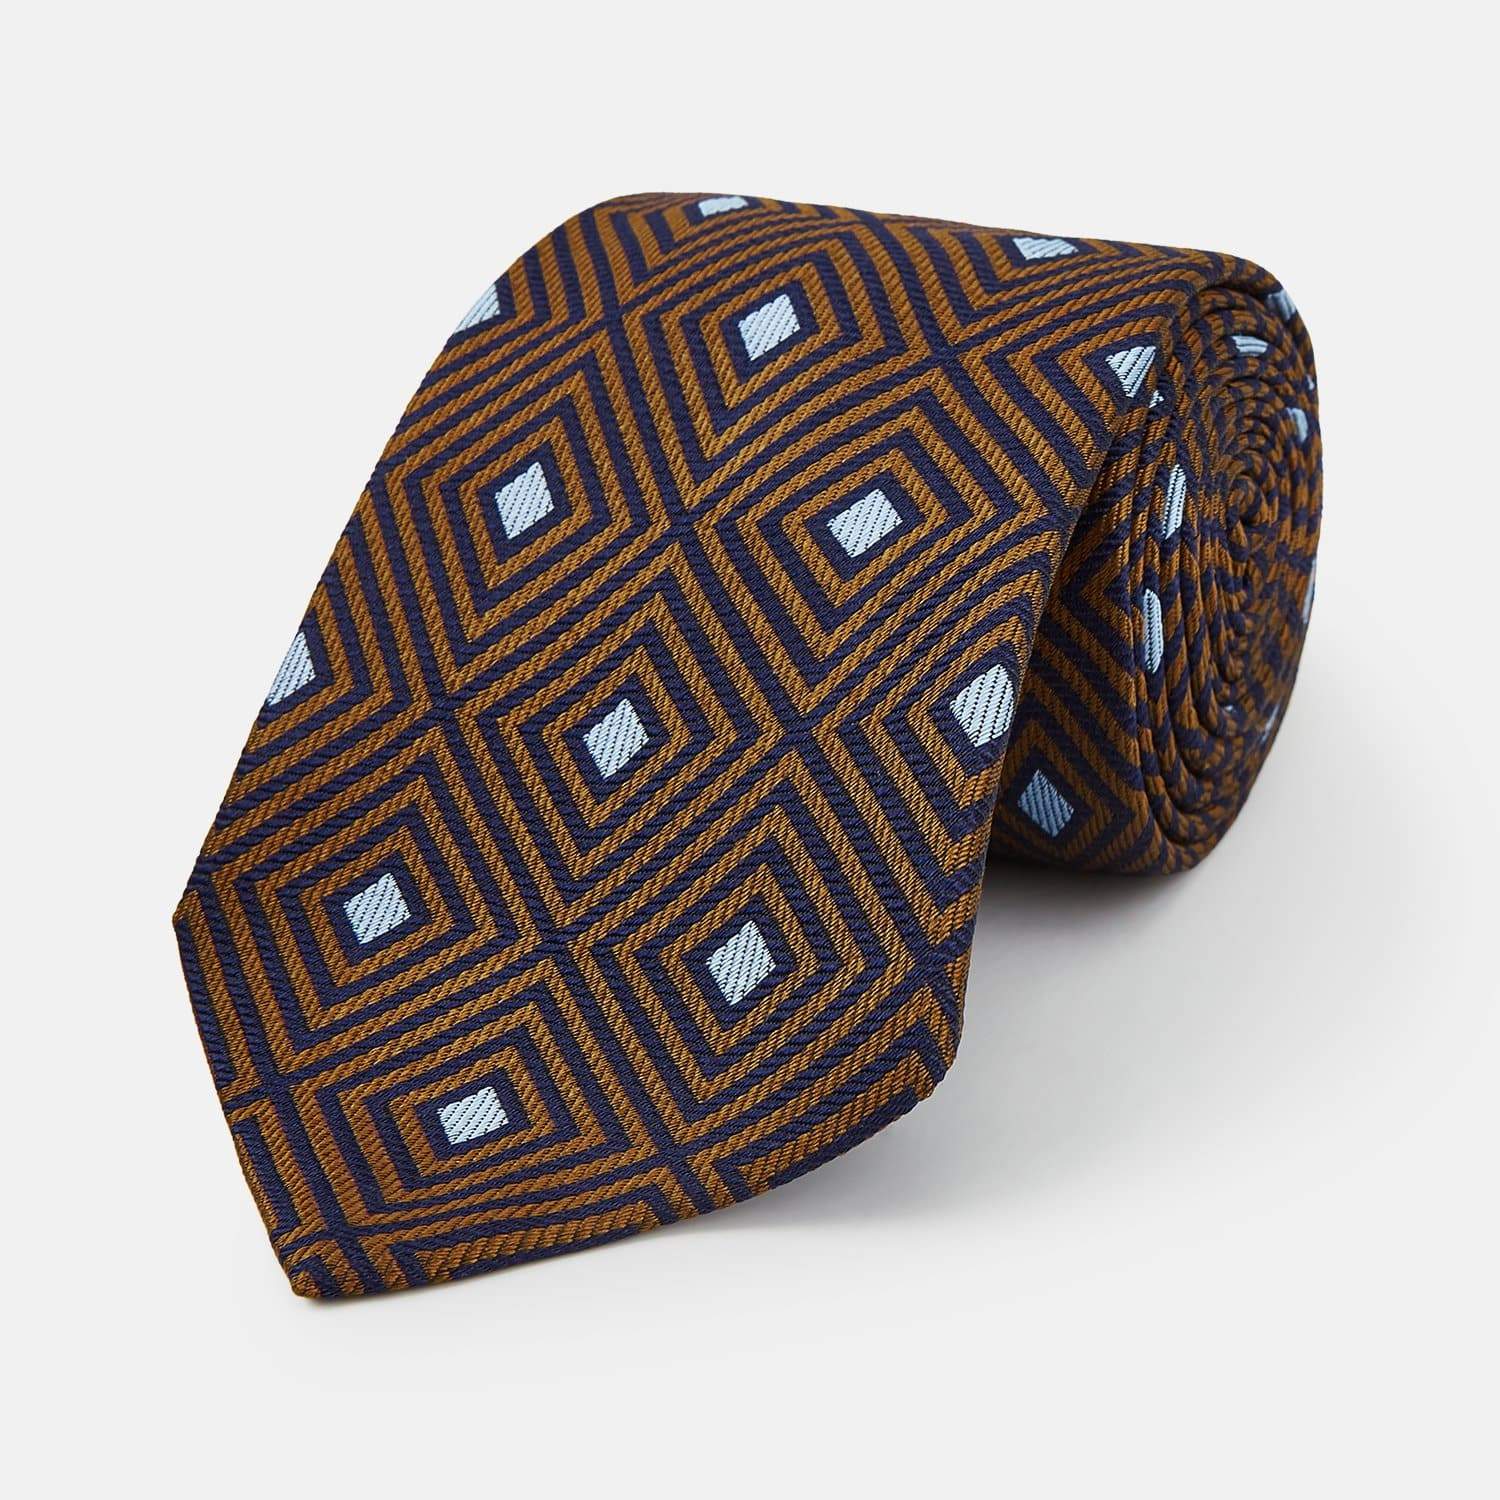 Silk Tie By Turnbull & Asser - Tomorrow Never Dies Edition - 007STORE